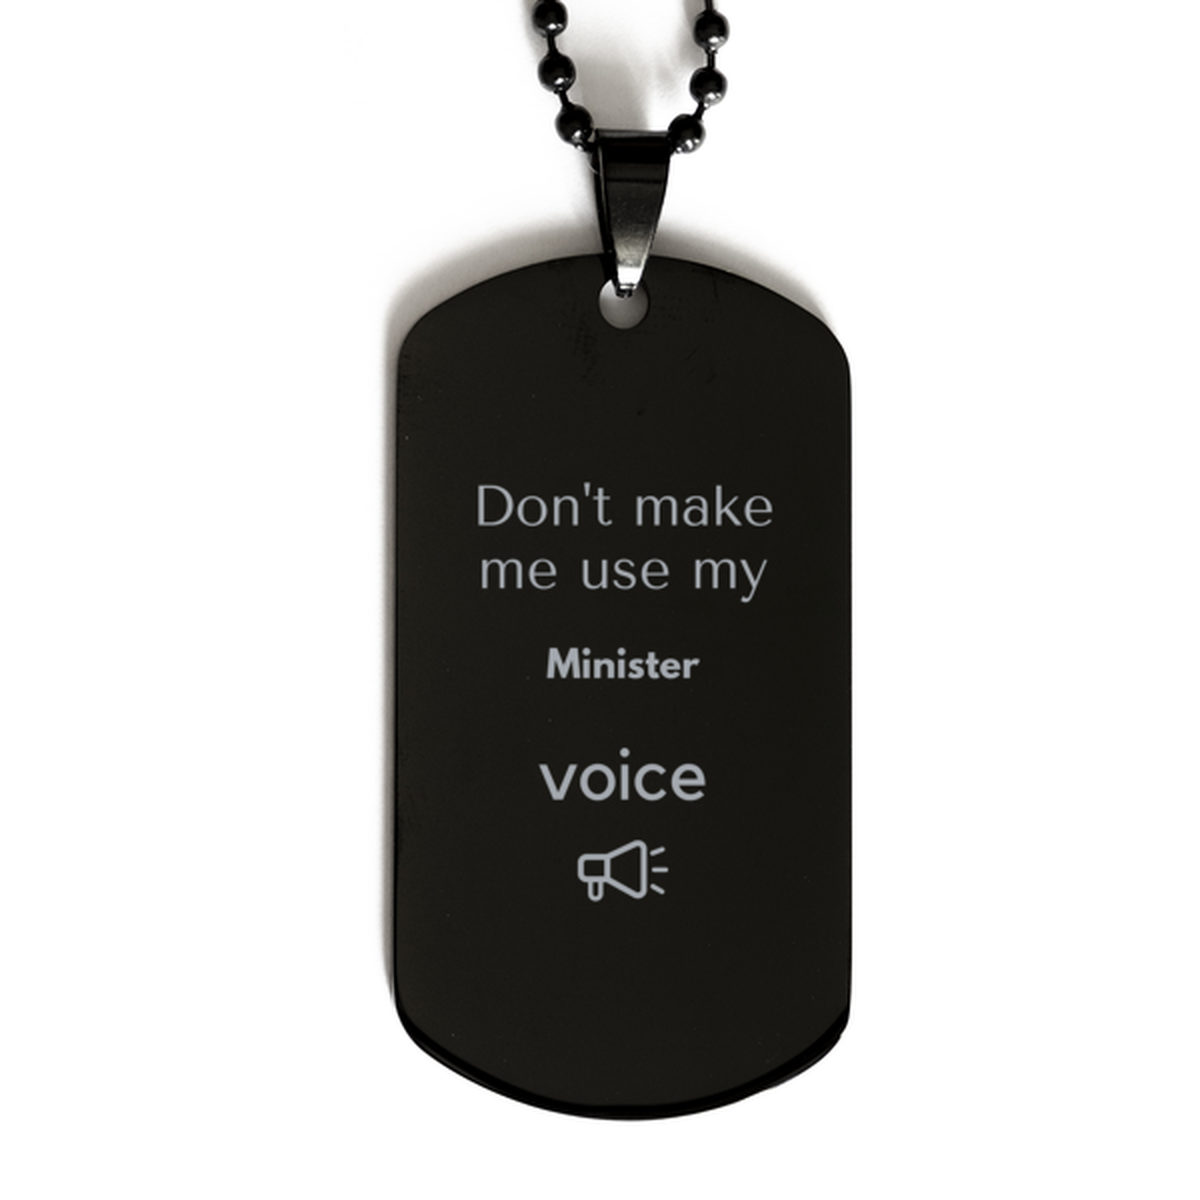 Don't make me use my Minister voice, Sarcasm Minister Gifts, Christmas Minister Black Dog Tag Birthday Unique Gifts For Minister Coworkers, Men, Women, Colleague, Friends